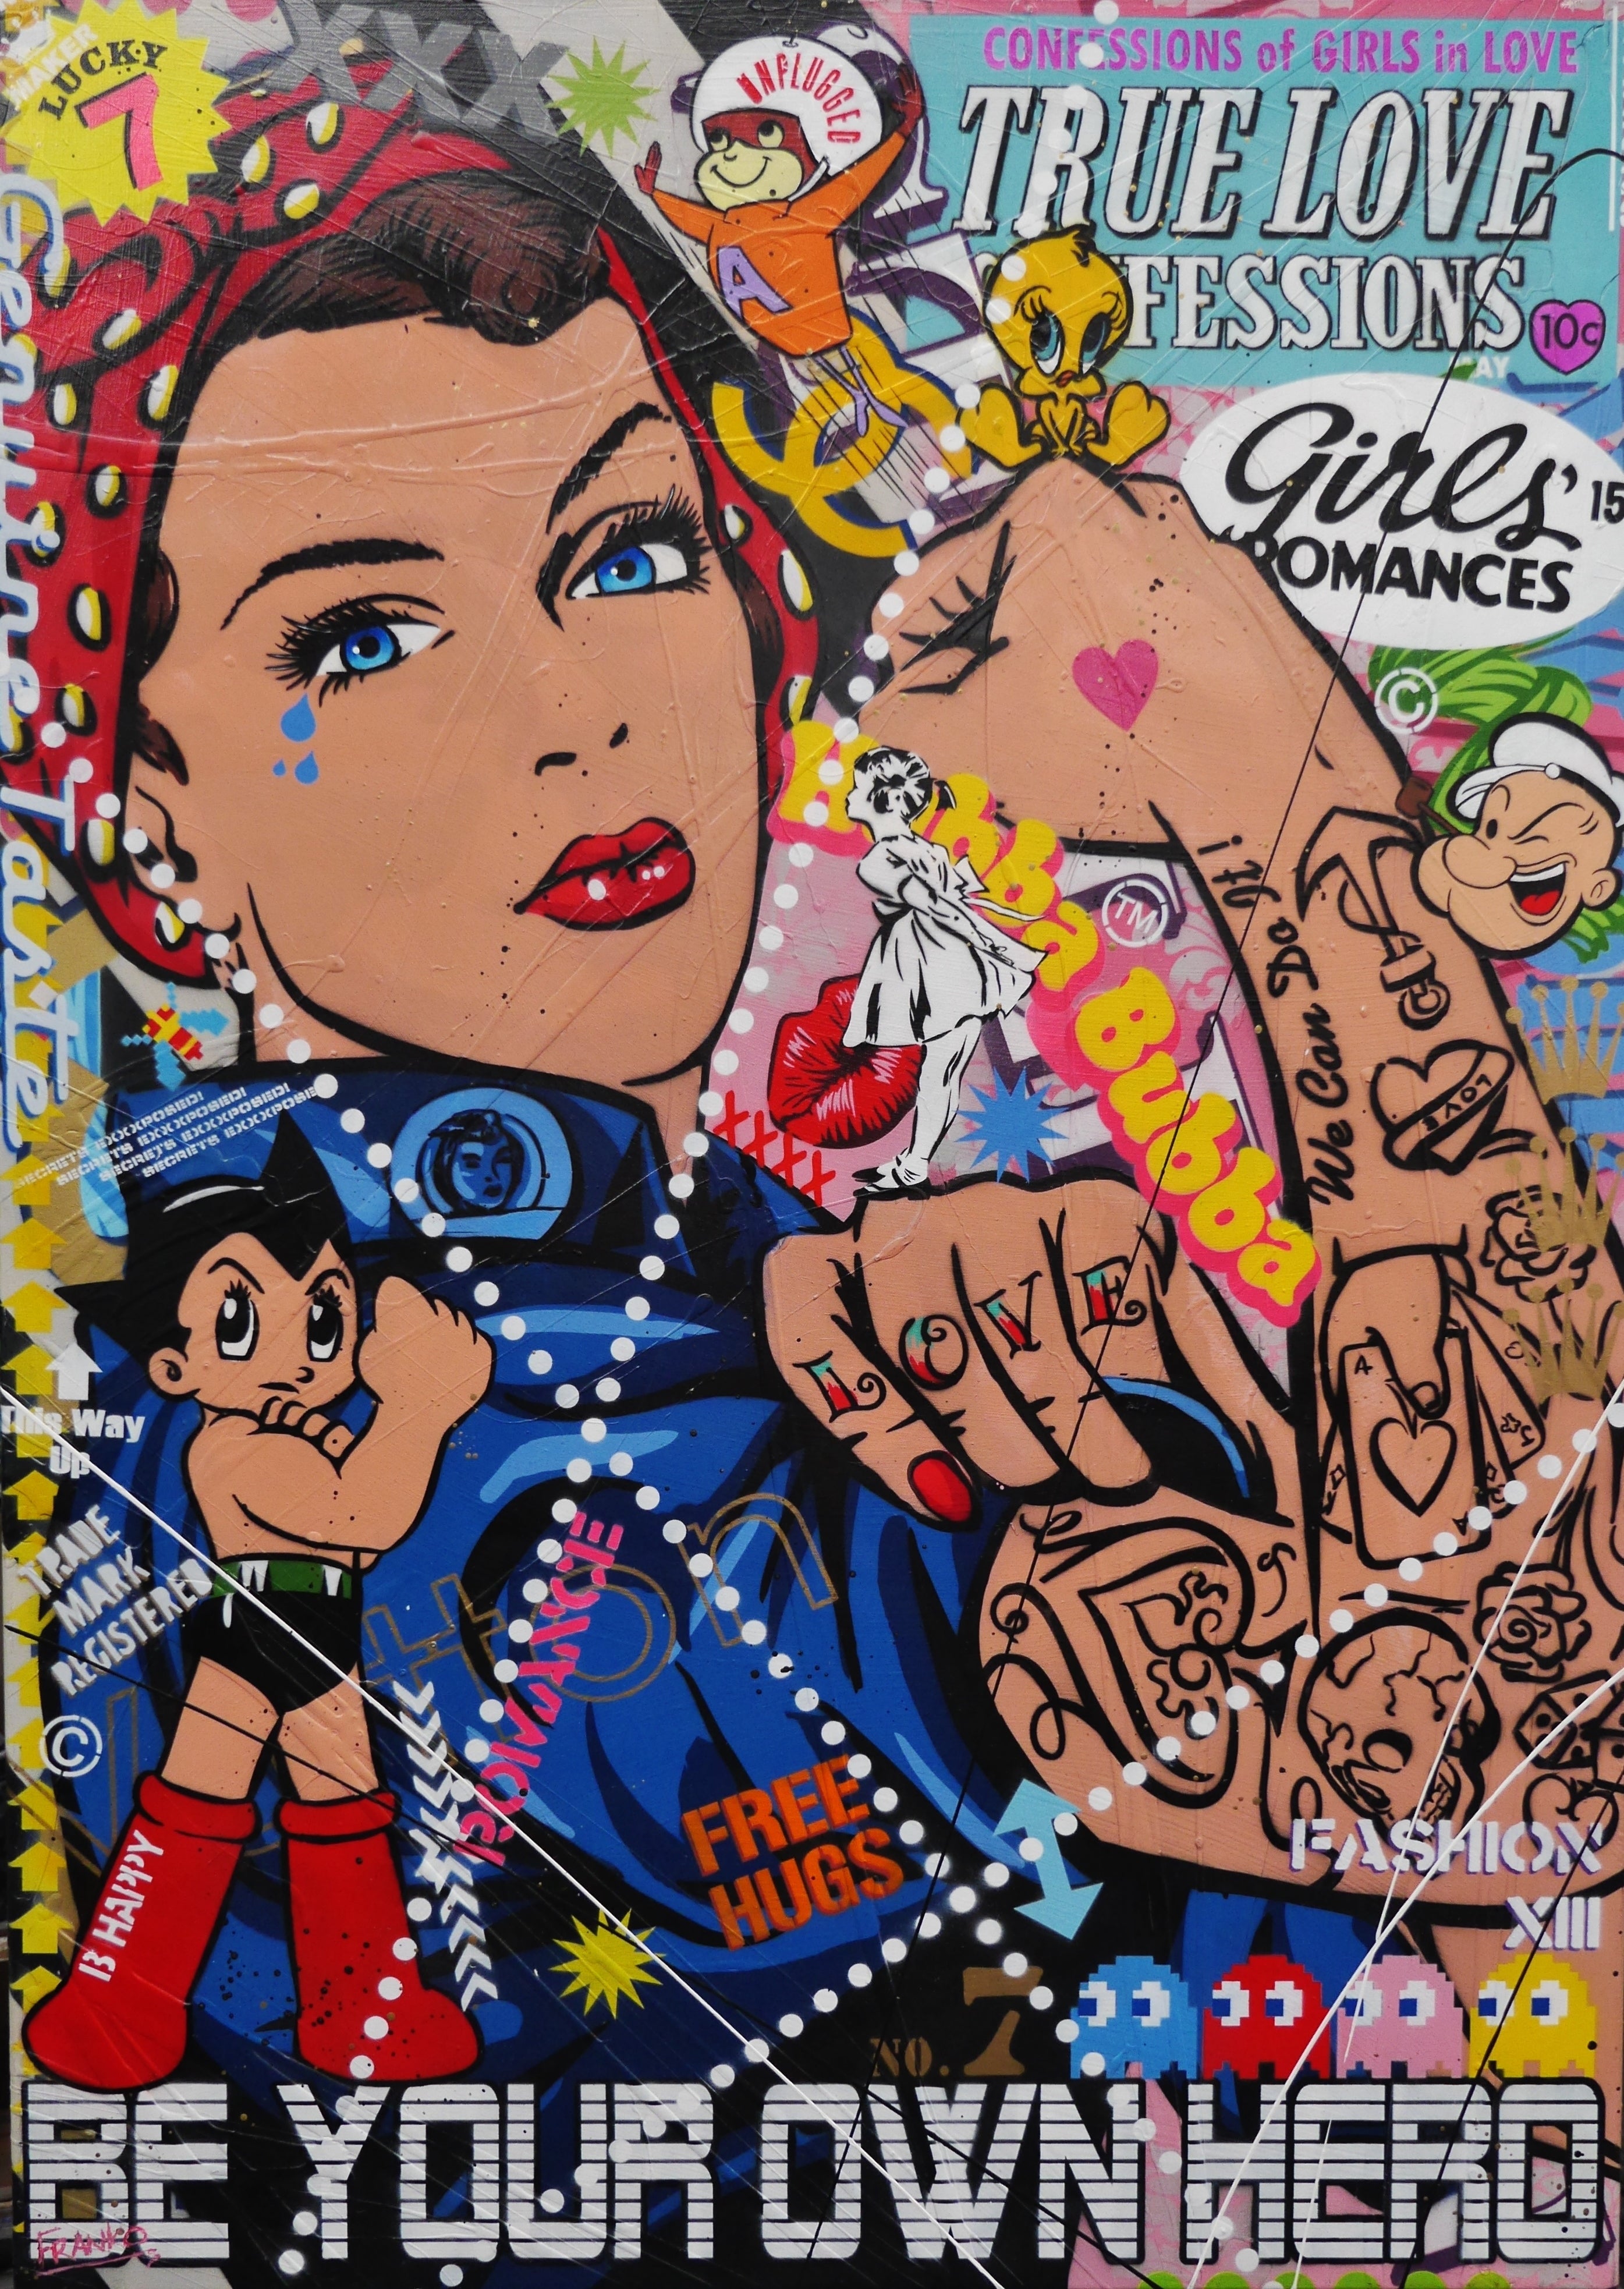 Be your own Rosie 140cm x 100cm Rosie The Riveter Textured Urban Pop Art Painting (SOLD)